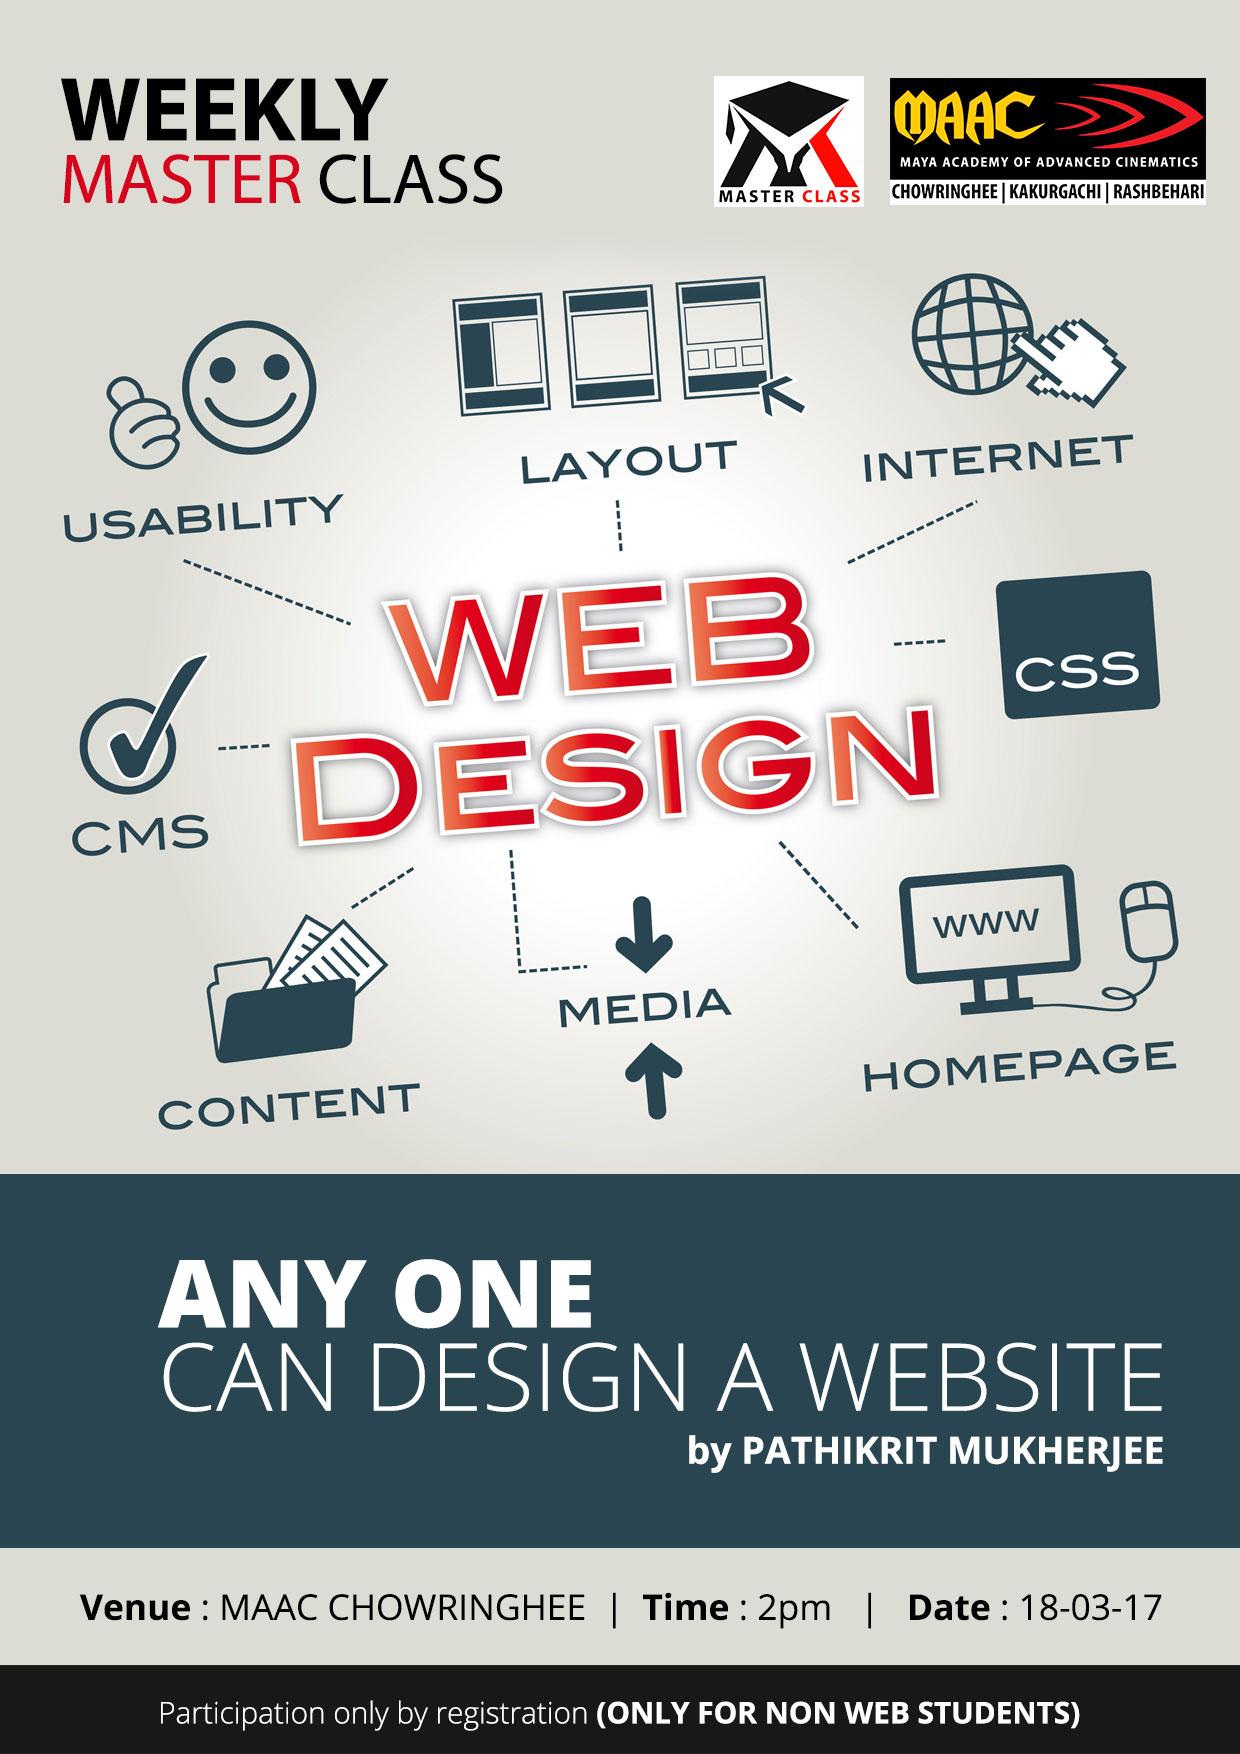 Weekly Master Class on ANY ONE CAN DESIGN WEBSITE - Pathikrit Mukherjee